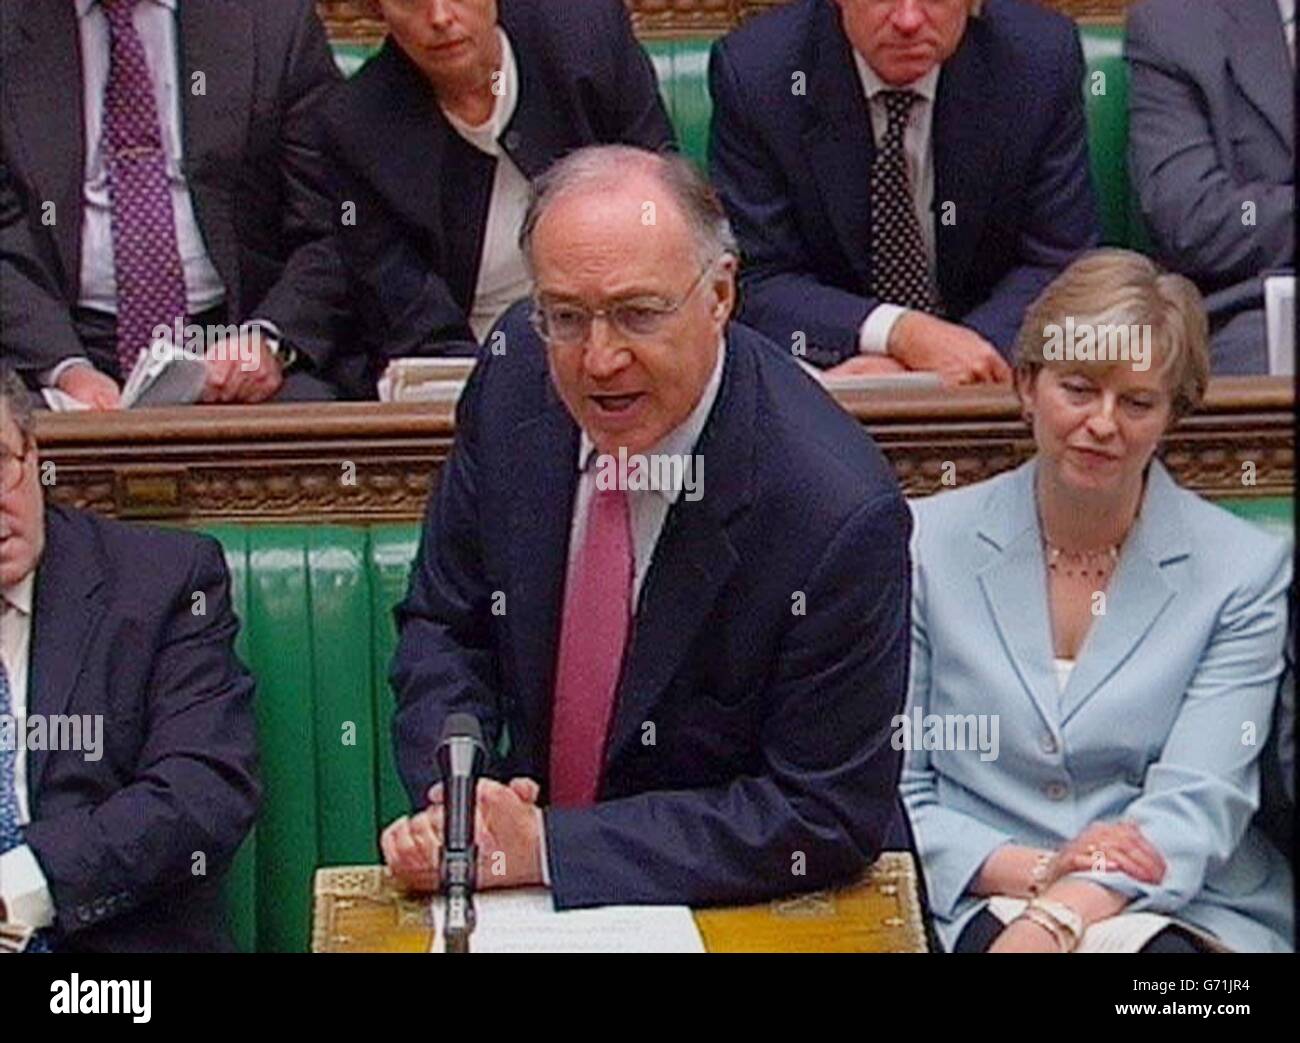 Conservative Party leader Michael Howard poses a question to Prime Minister Tony Blair in the House of Commons, during Prime Minister's Questions. Stock Photo